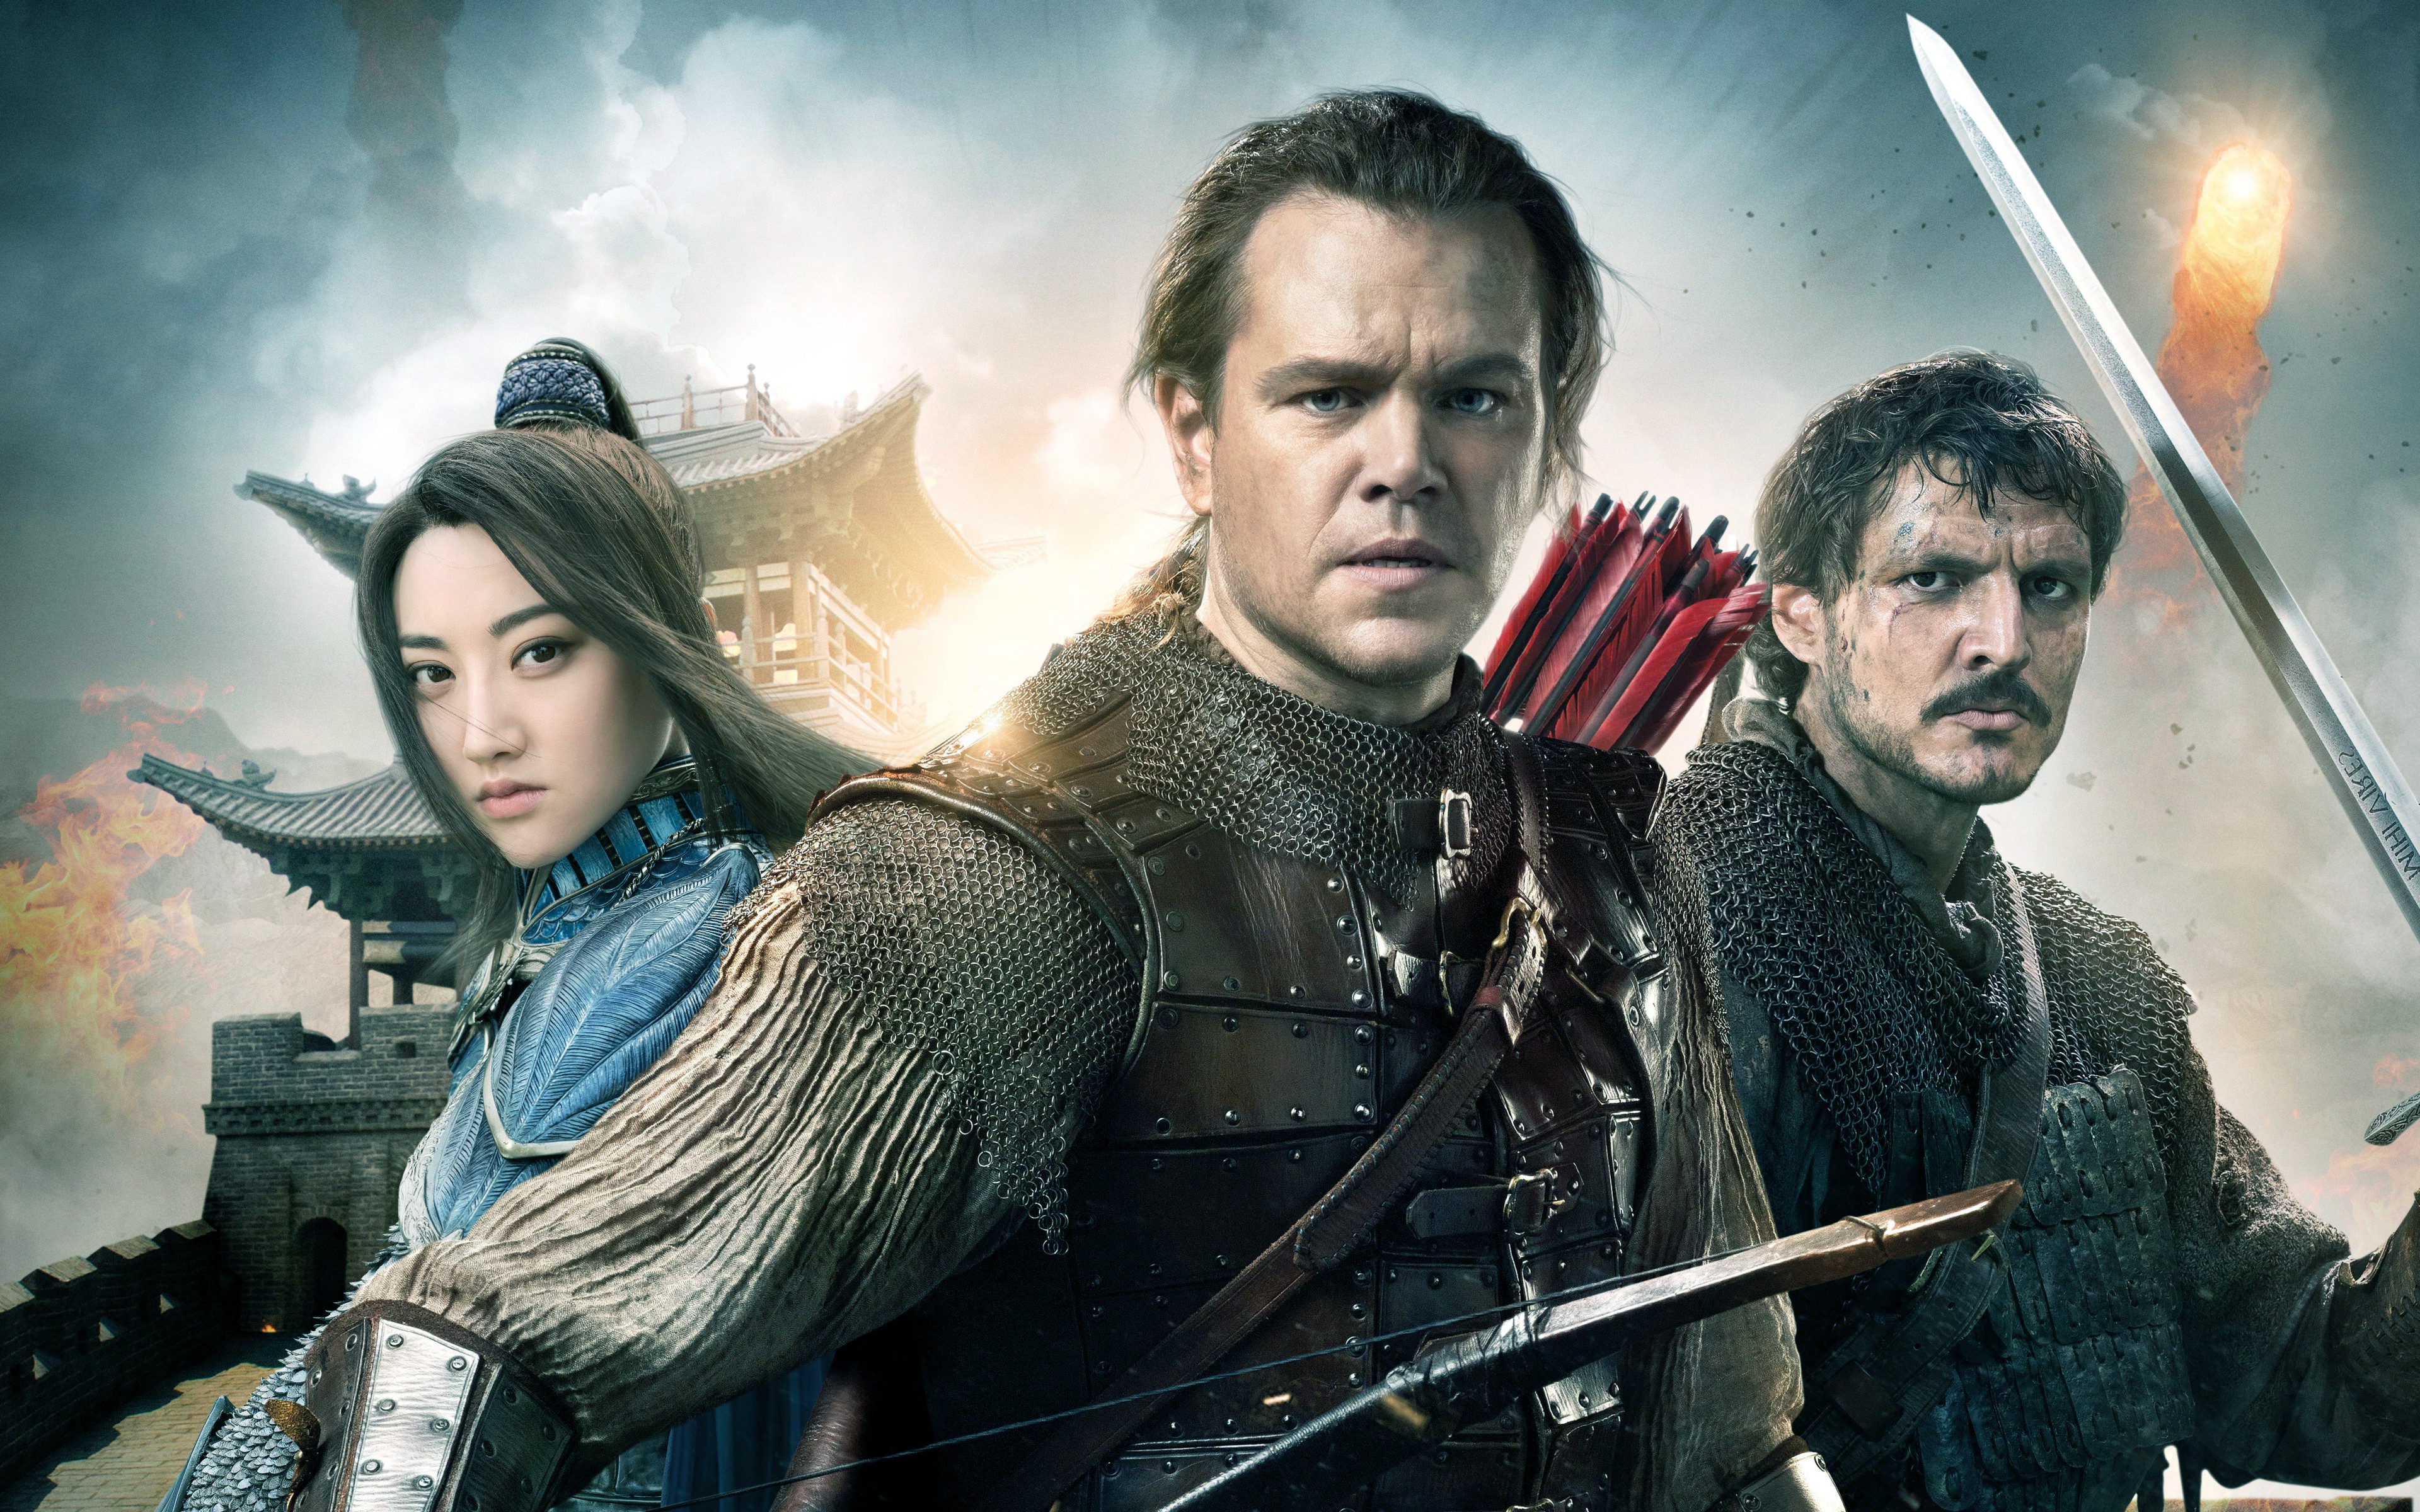 the great wall movie in hindi download 9xmovies